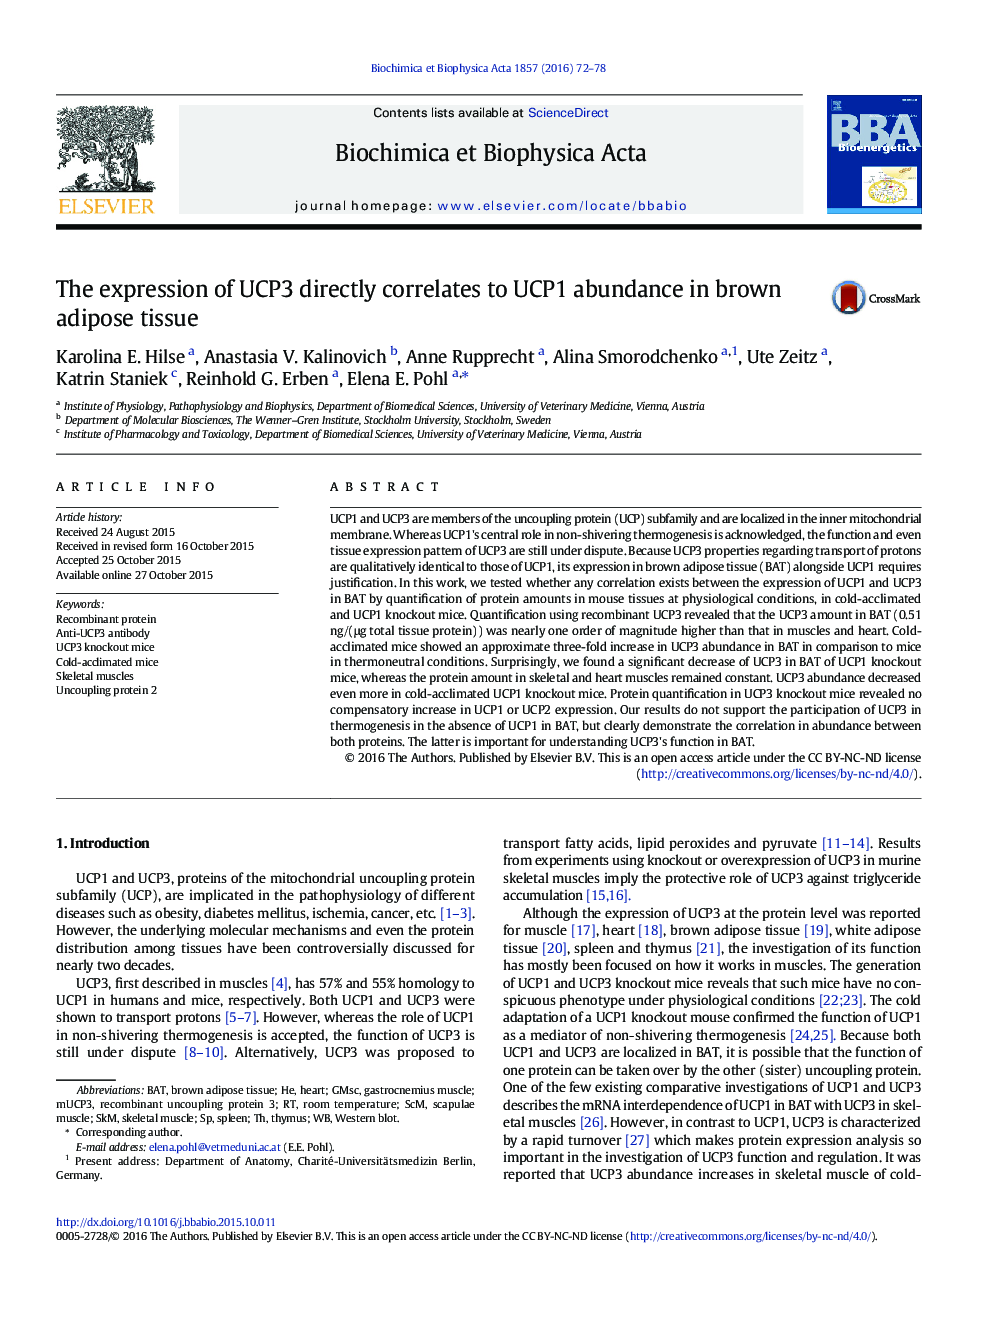 The expression of UCP3 directly correlates to UCP1 abundance in brown adipose tissue